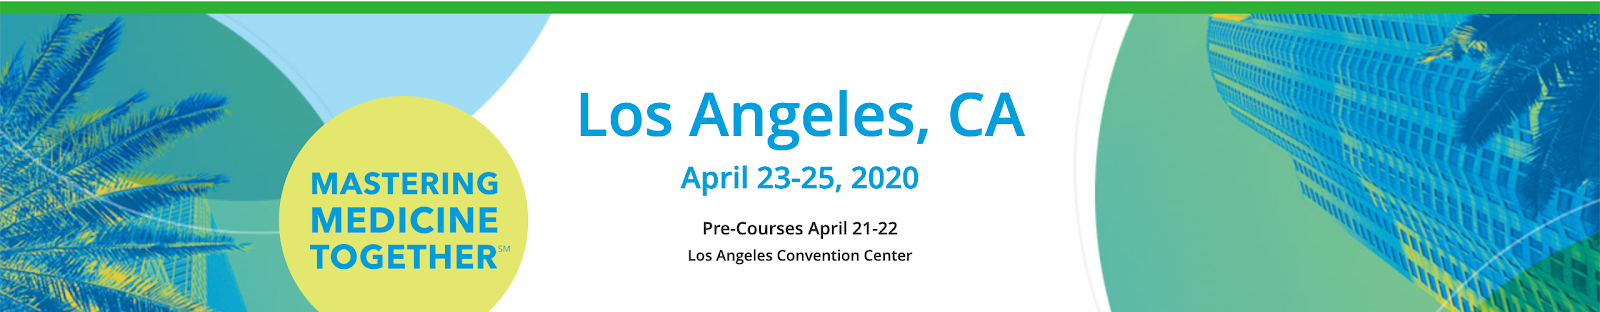 ACP's Internal Medicine Meeting 2020 April 23-25th in Los Angeles, CA at the LA Convention Center. Early bird rates are available through January 31, 2020. Don’t forget to use the code: IMCURB20